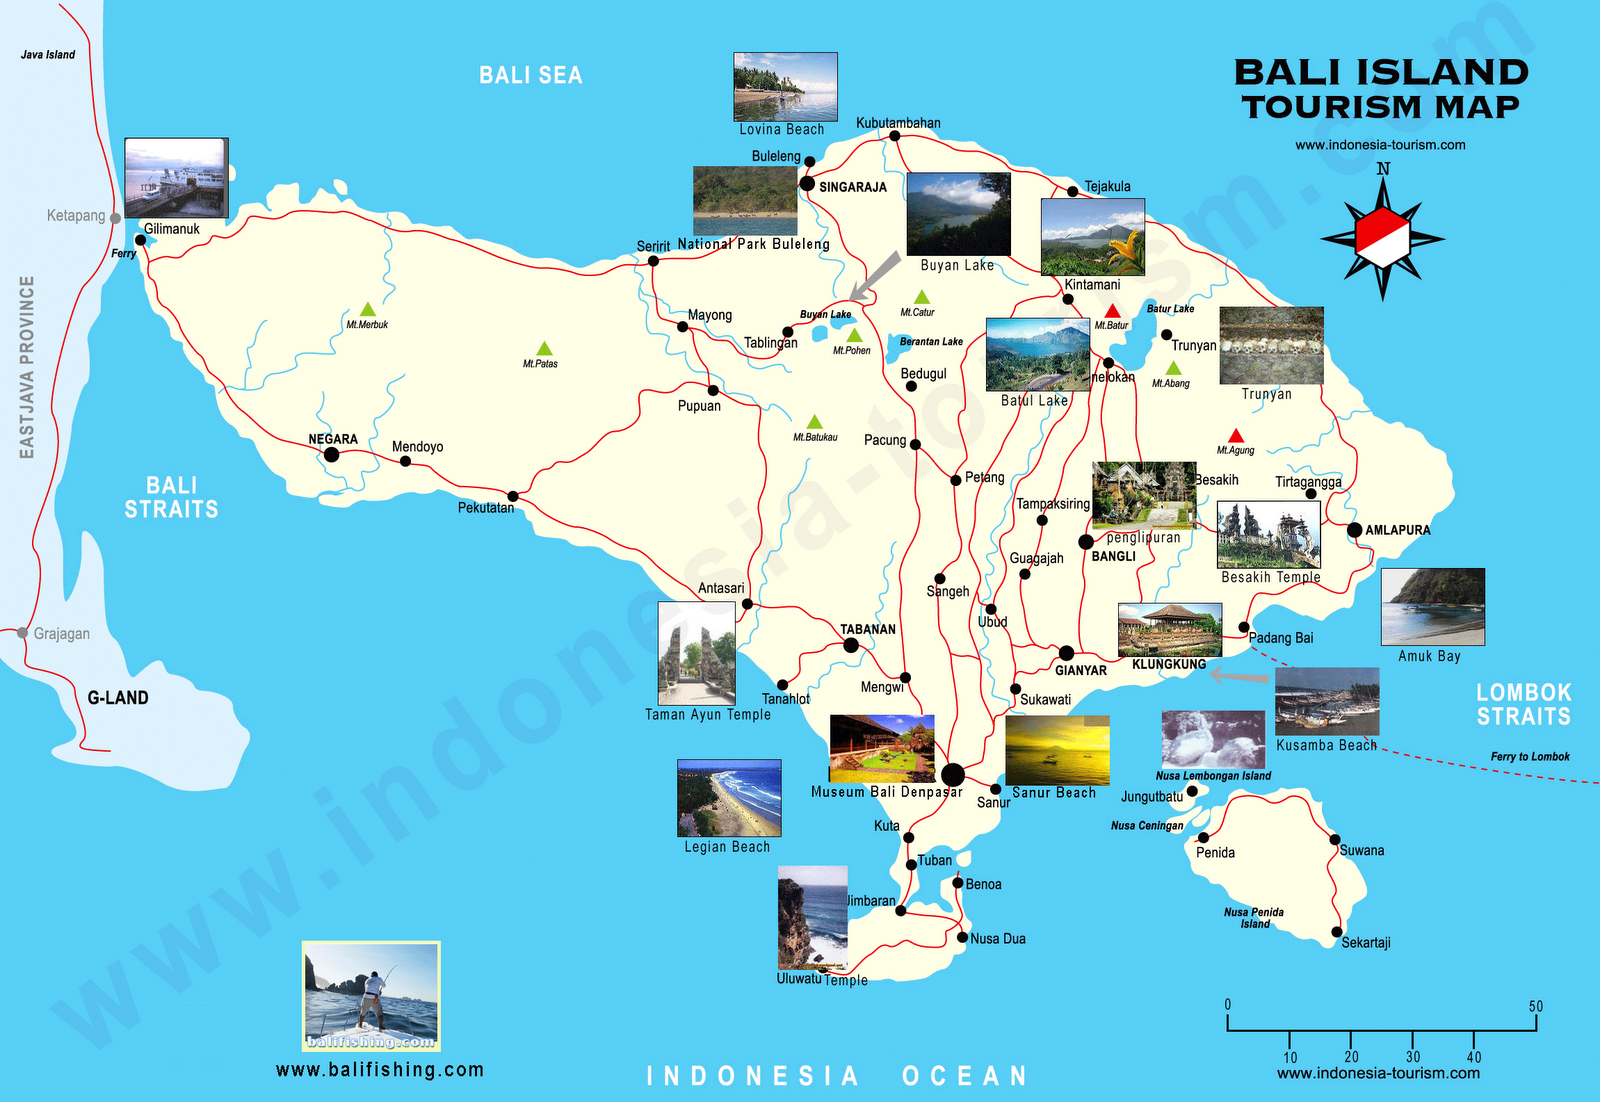 Bali, Indonesia - Travel Guide and Travel Info - Exotic Travel Destination